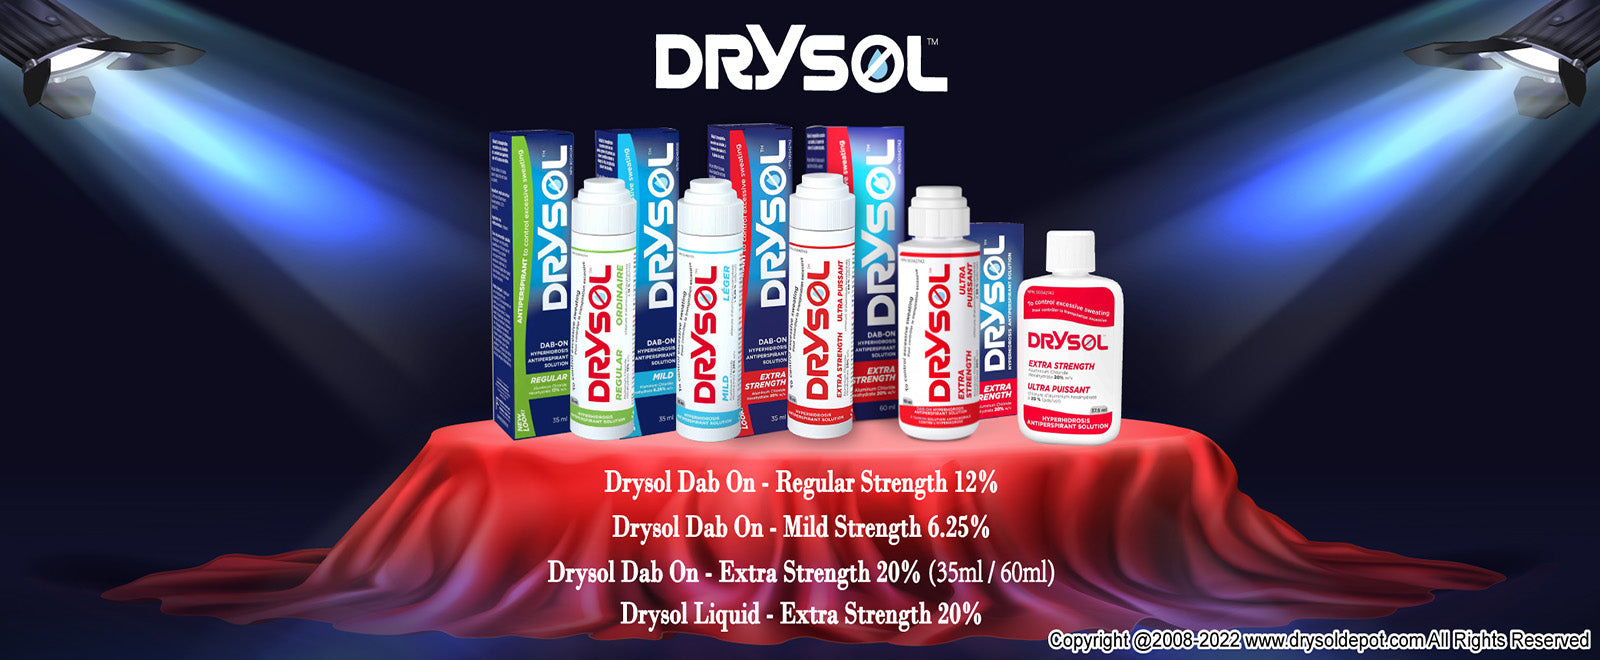 Drysol Products line - shop at DrysolDepot